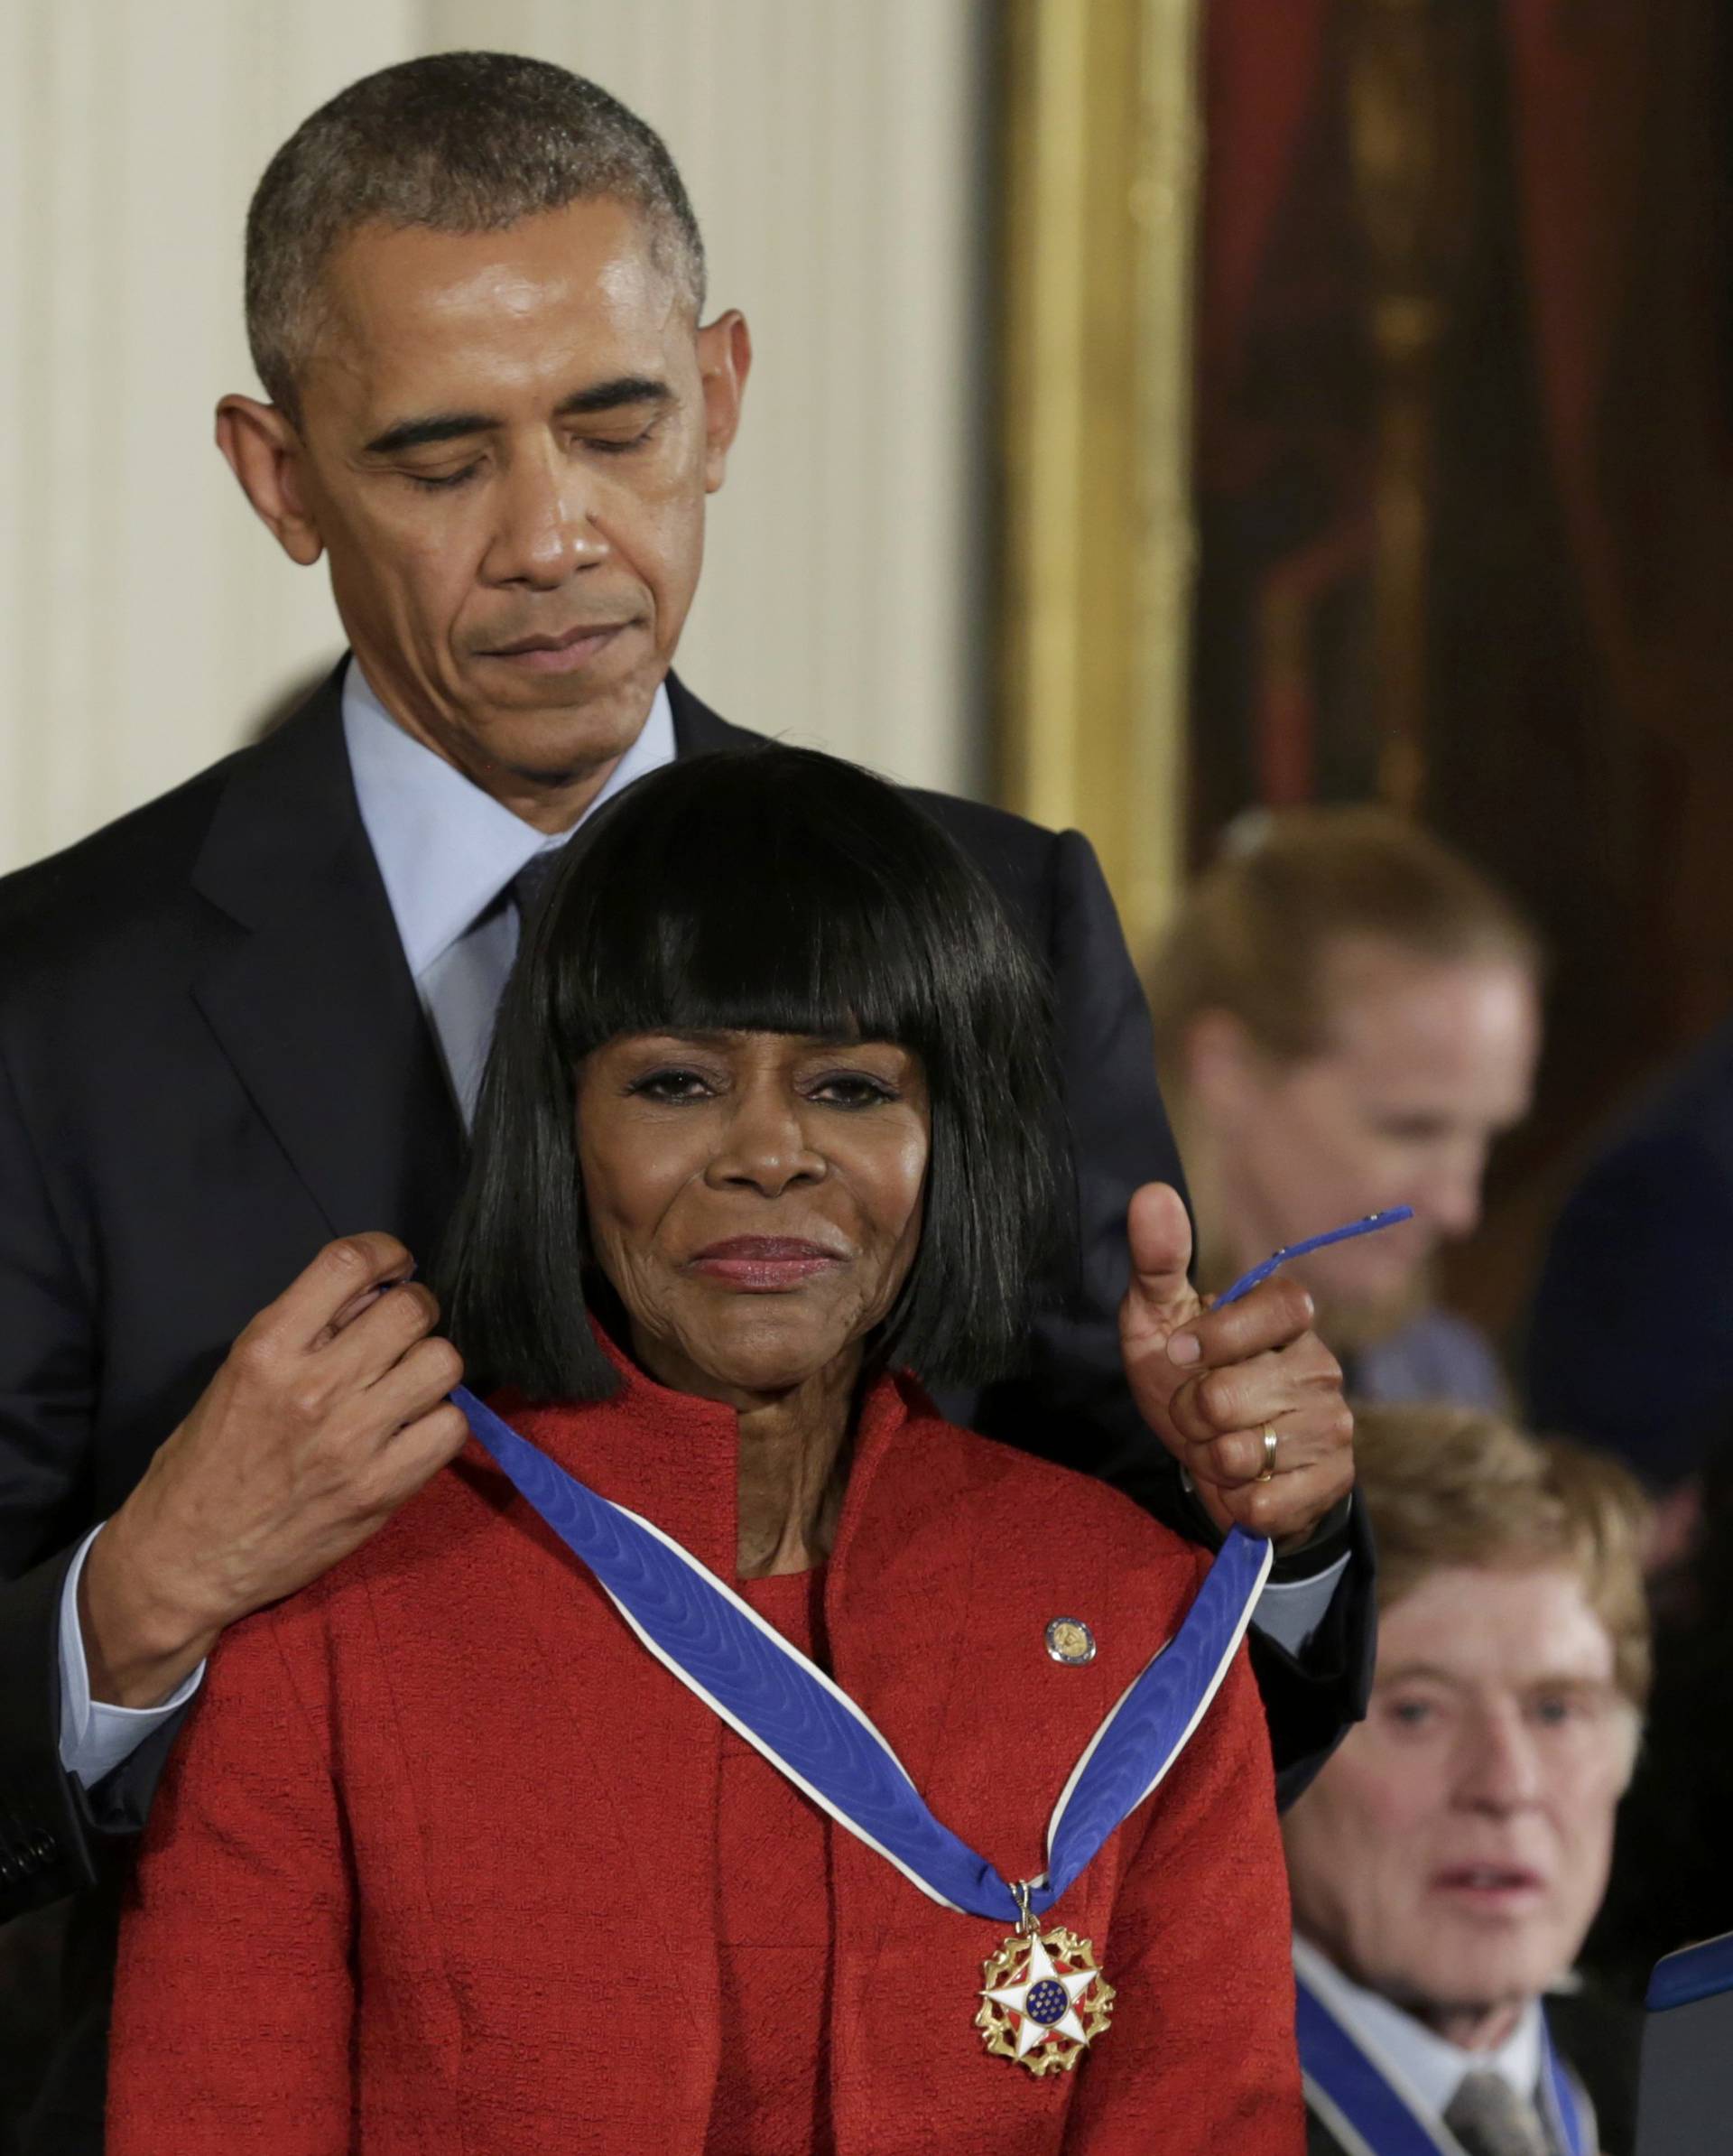 U.S. President Obama presents the Presidential Medal of Freedom to actress Tyson during ceremony at the White House in Washington